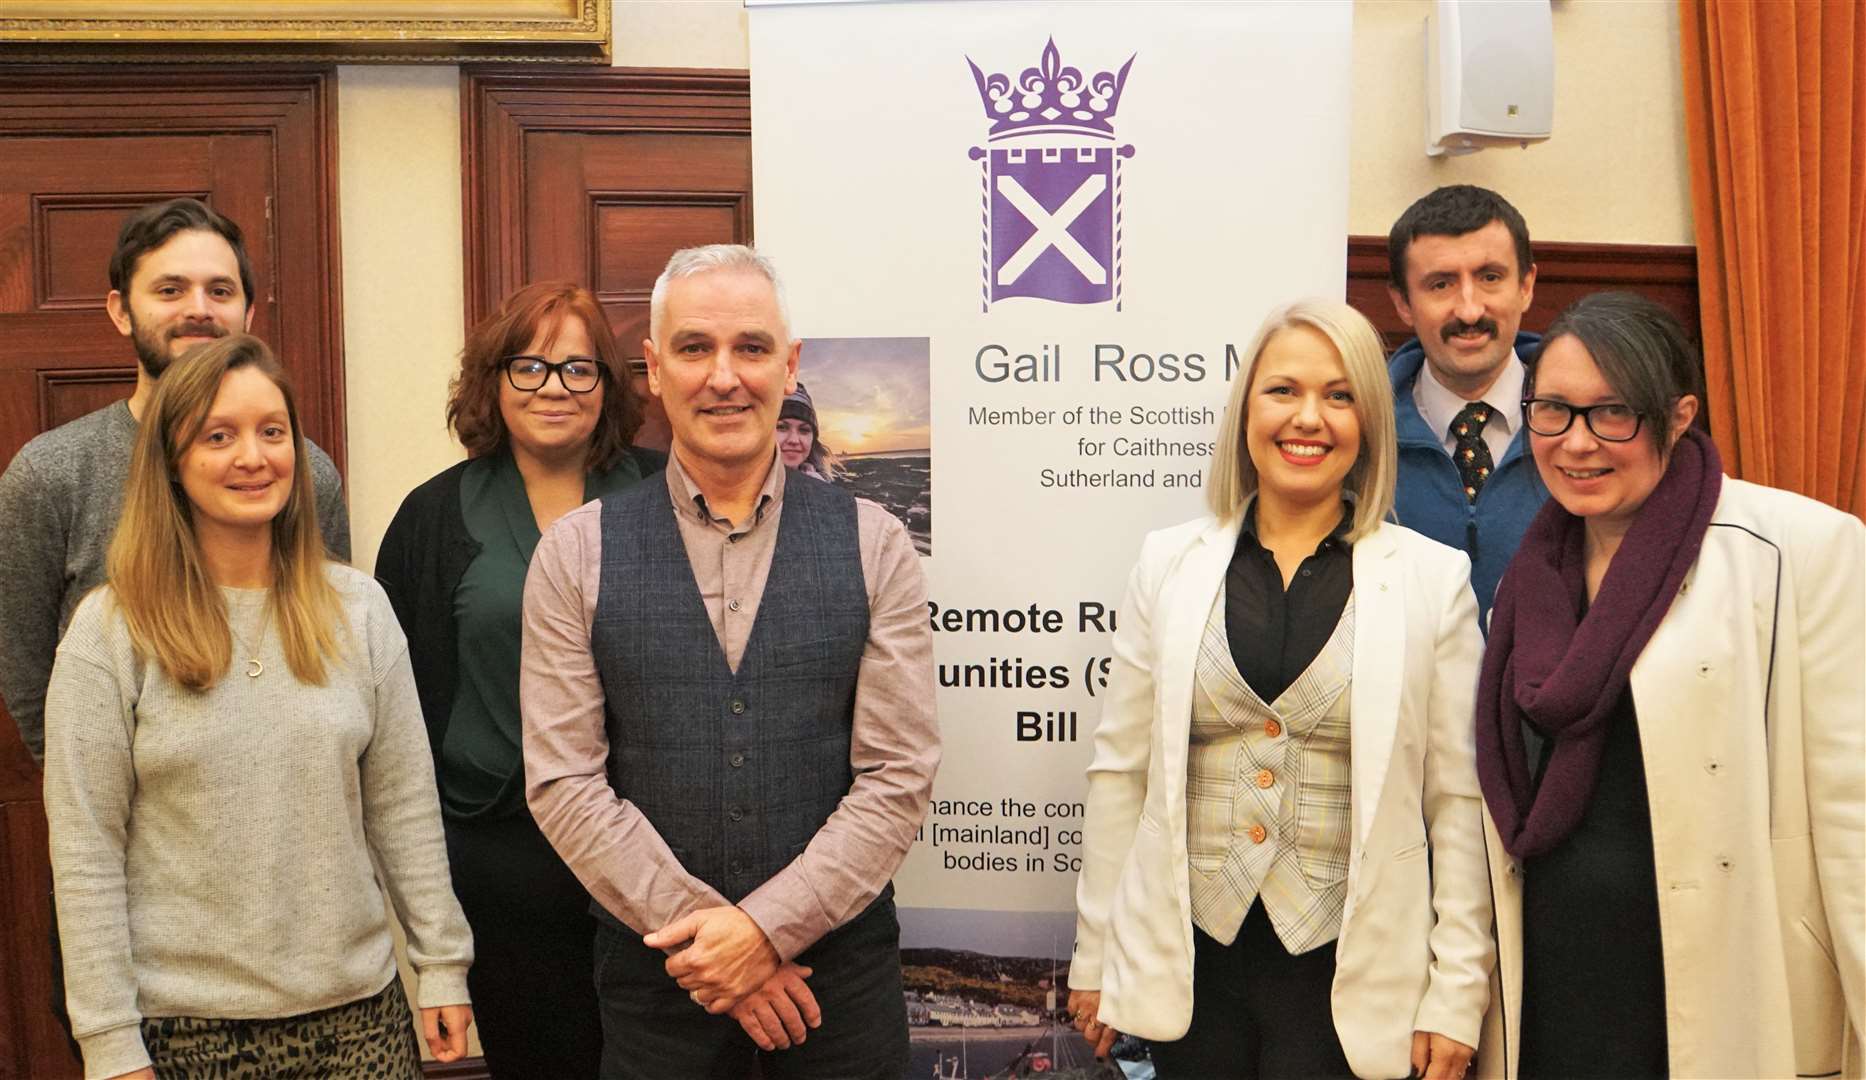 Gail Ross at Wick Town Hall in 2019 introducing her bill to safeguard Scotland's remote rural communities. Picture: DGS